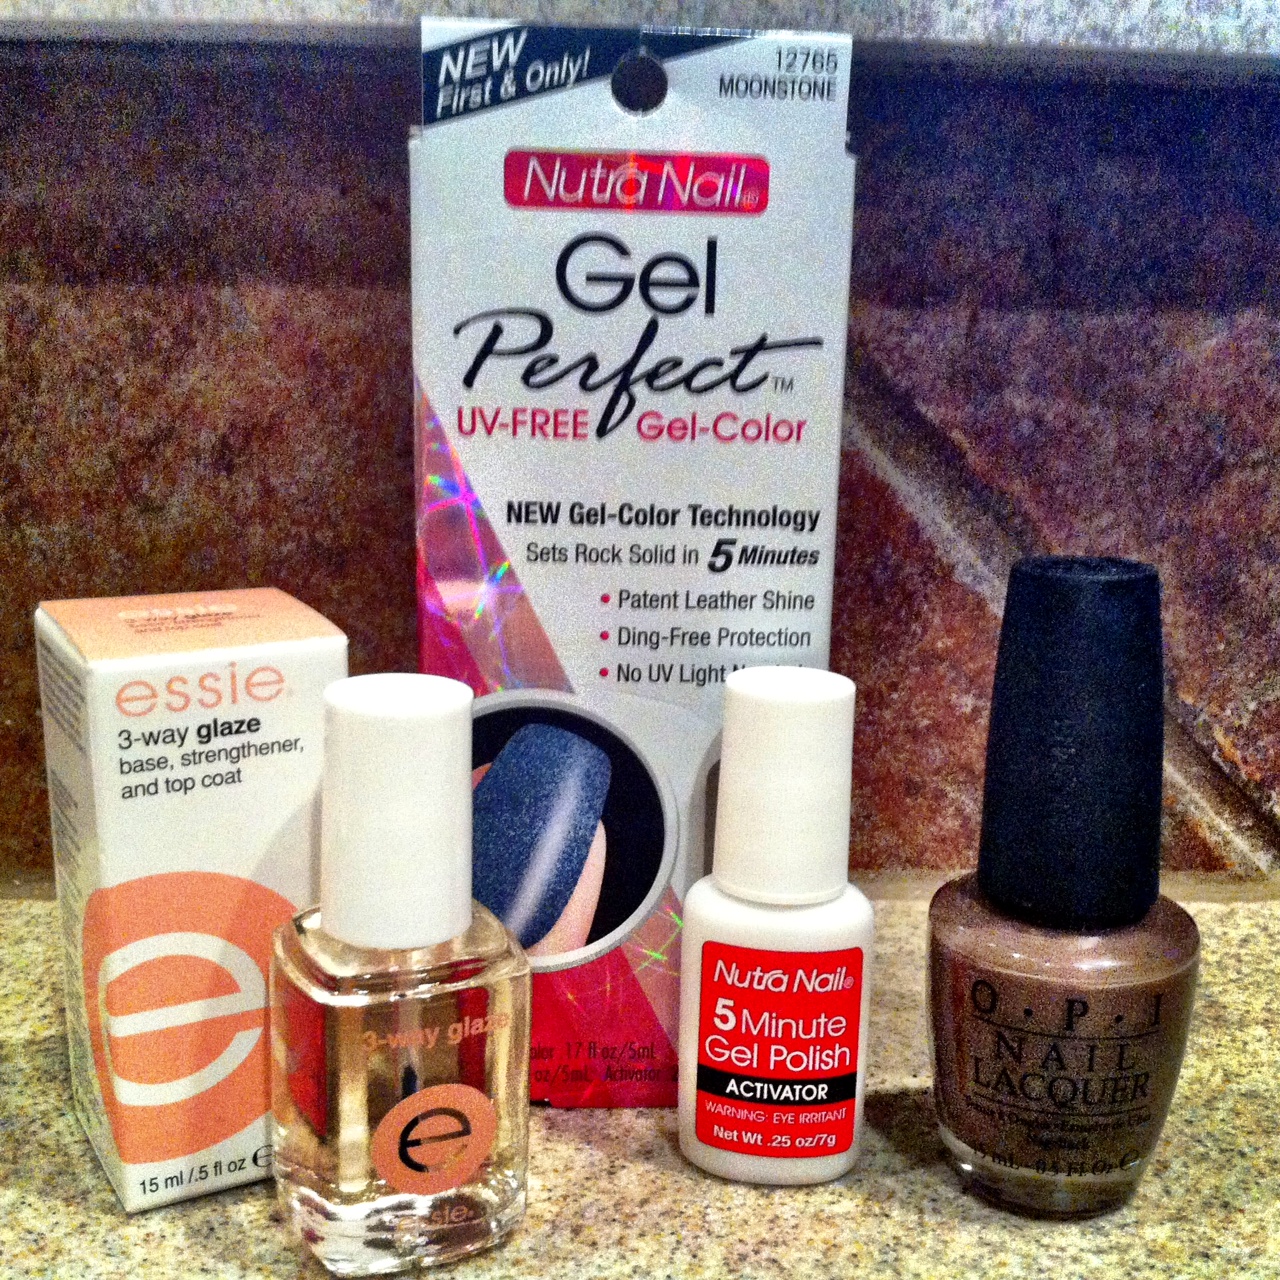 Step #1: Make sure you nails are dry, smoothed and buffed